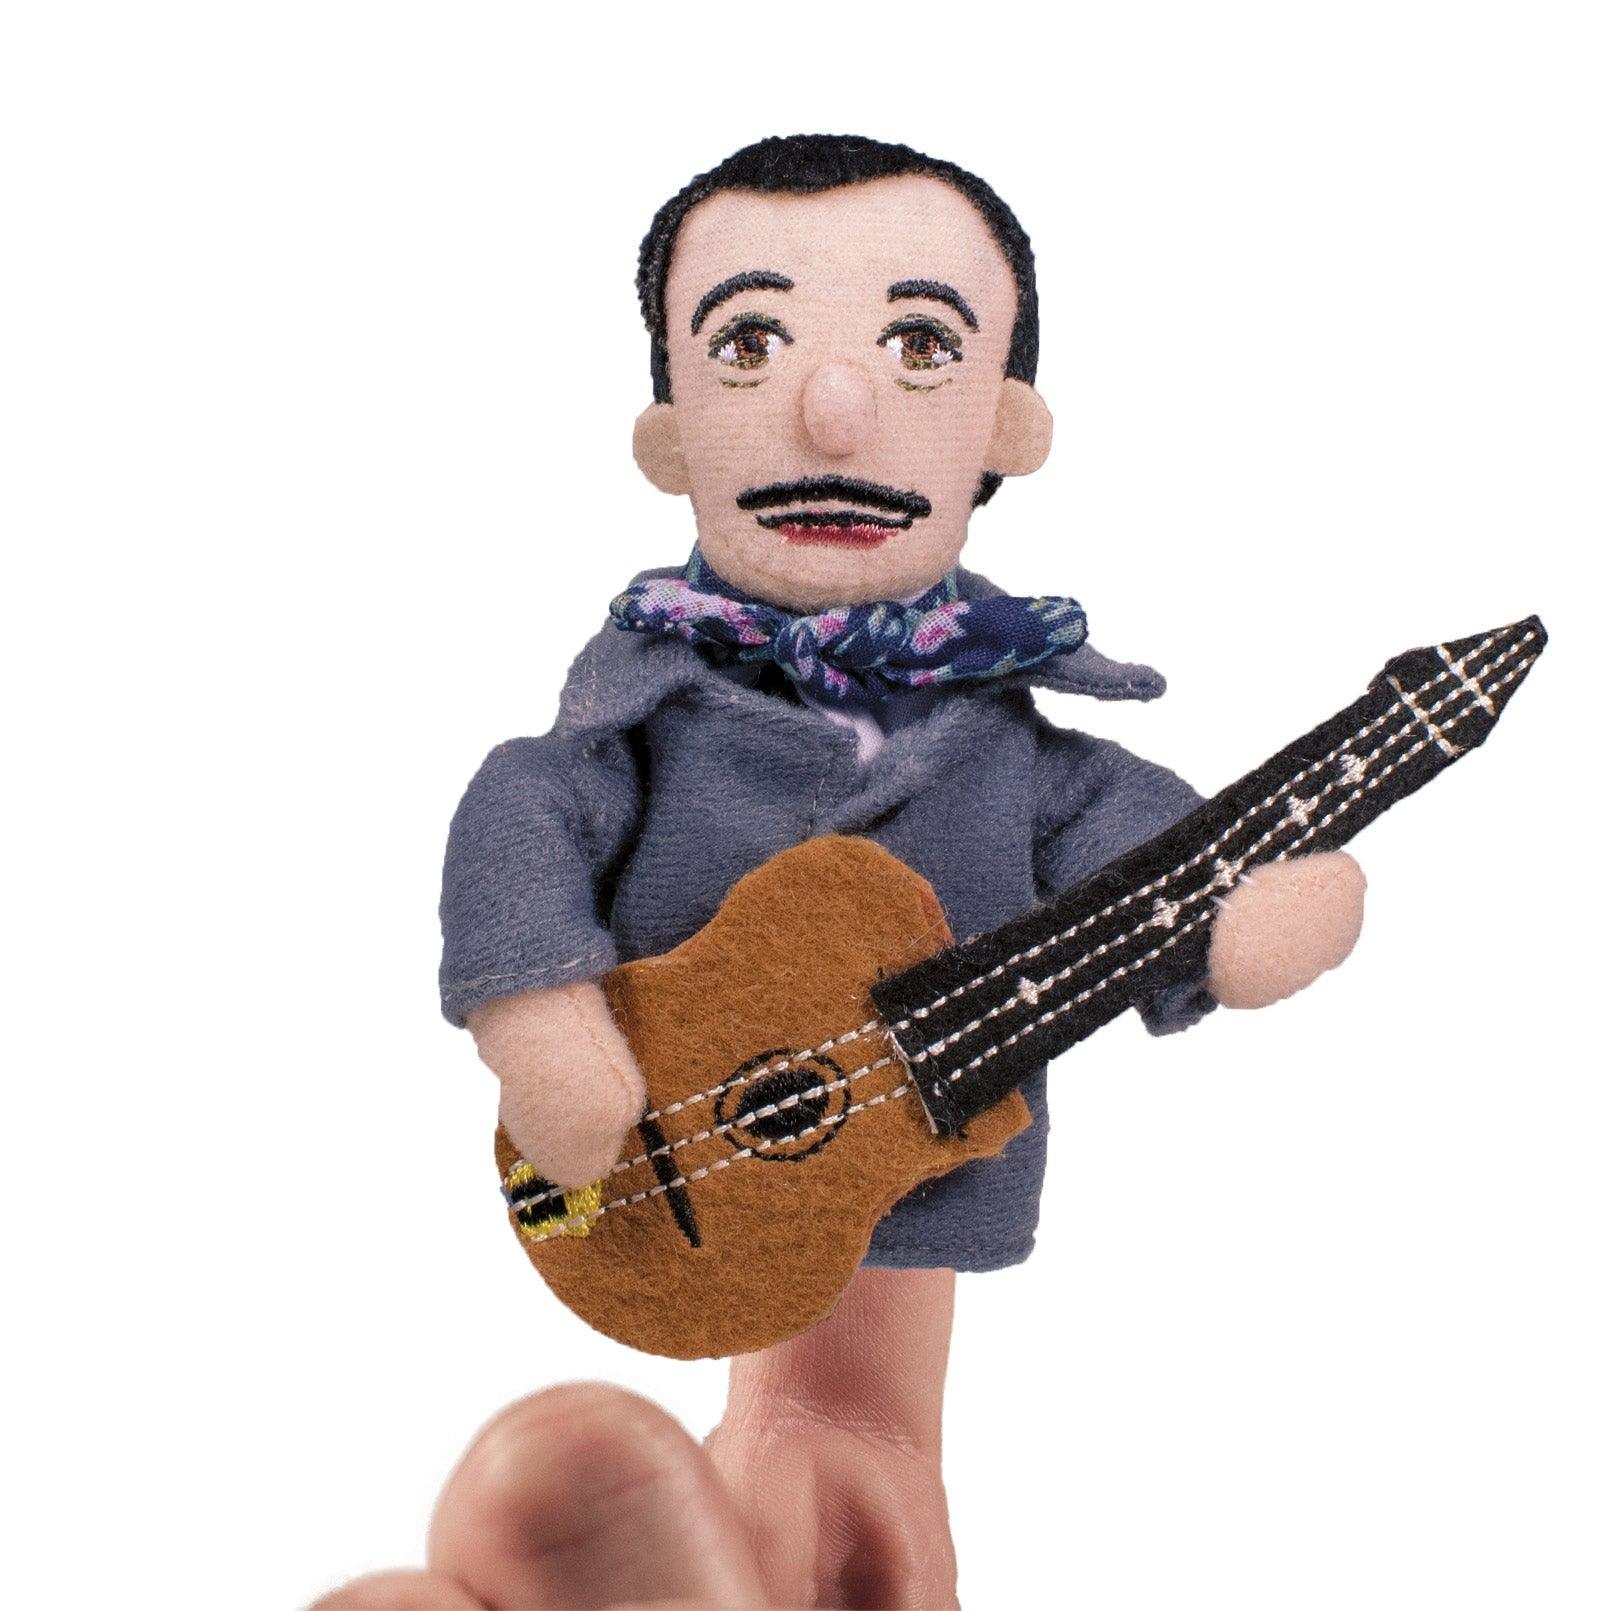 Product photo of Django Reinhardt Finger Puppet, a novelty gift manufactured by The Unemployed Philosophers Guild.